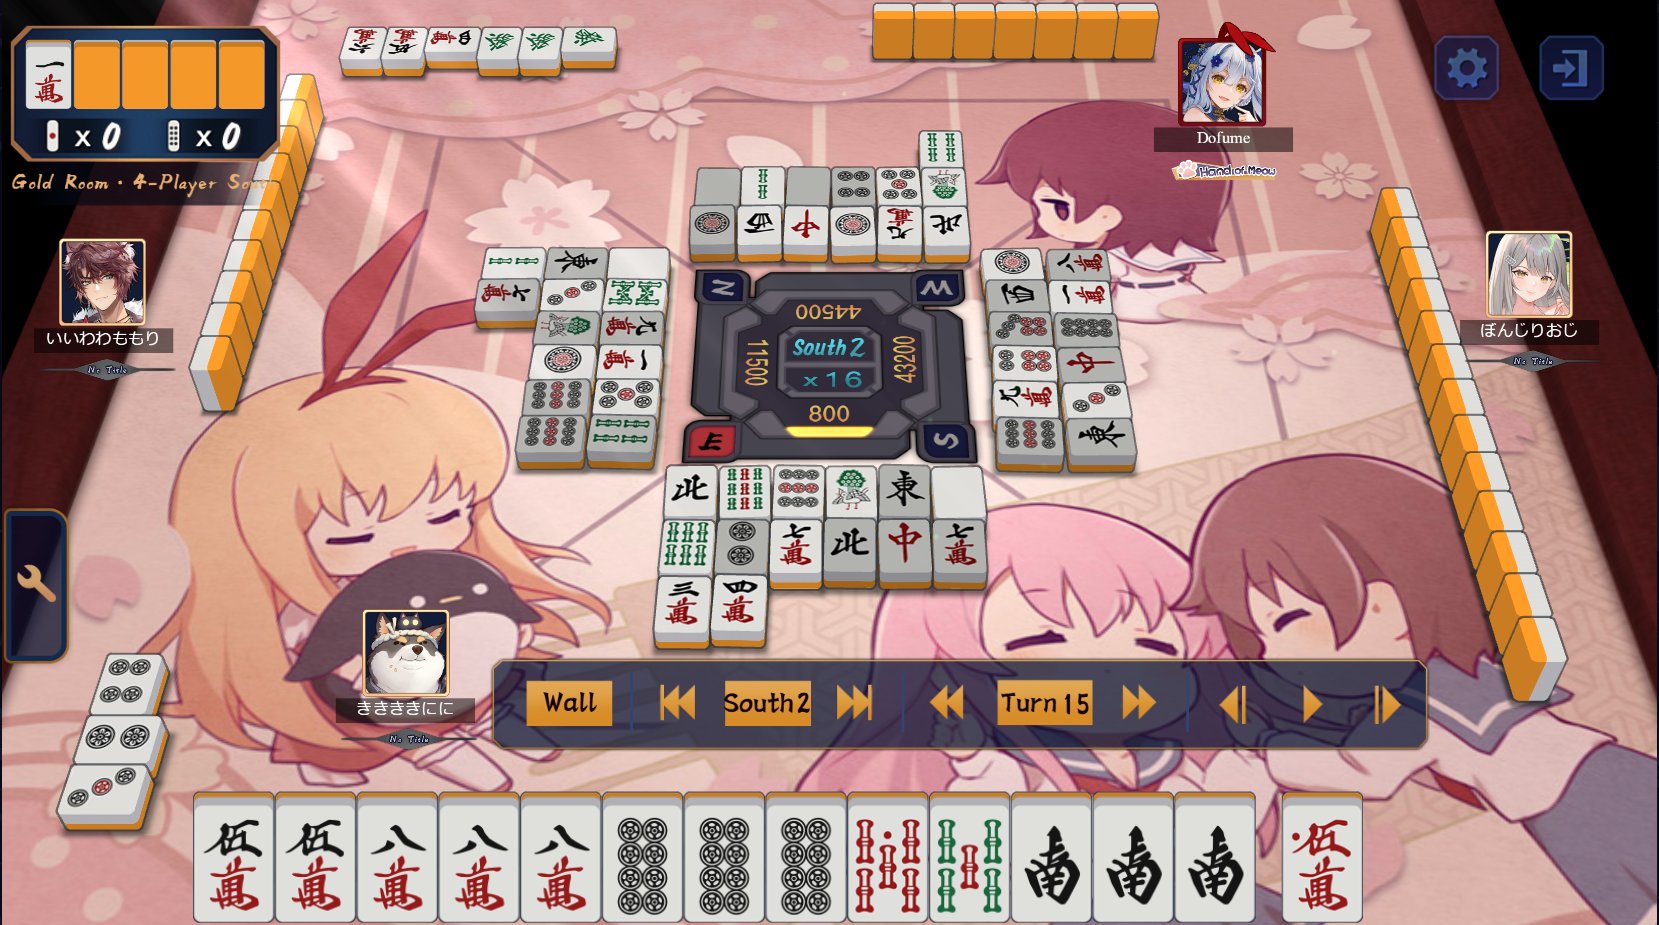 Mahjong Soul Game collaboration begins on November 15; watch the